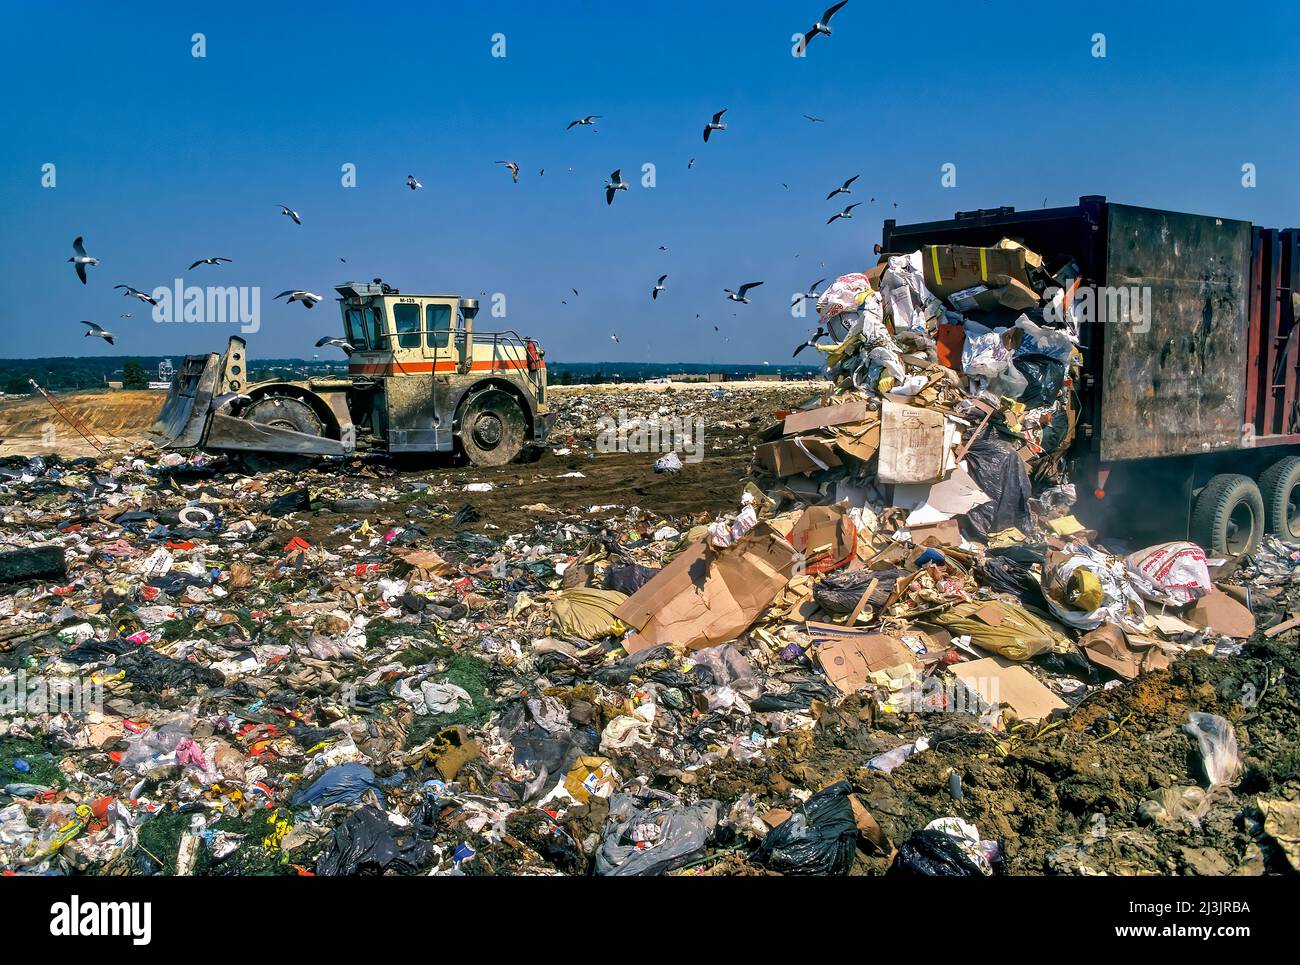 Garbage Truck Dumping Load at Landfill as Sheep's Feet Dozers Spread the Refuse Stock Photo